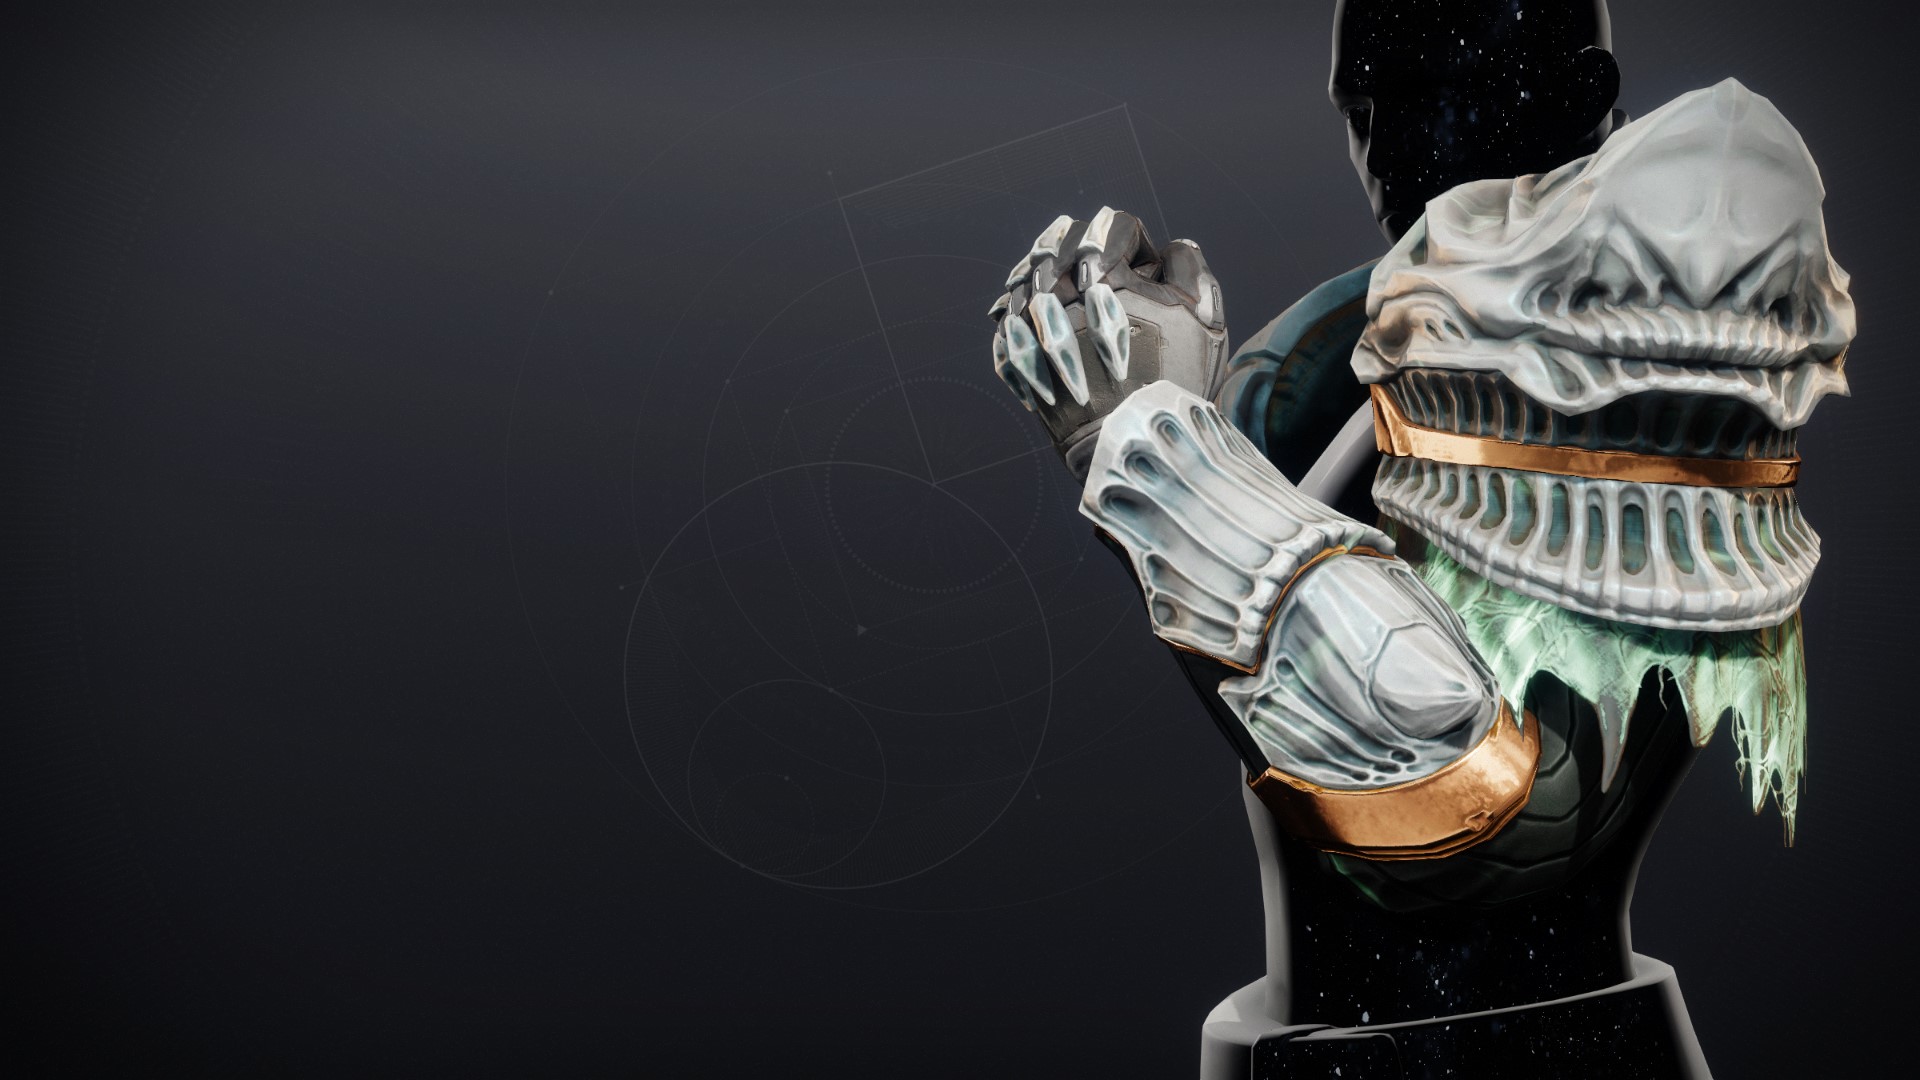 An in-game render of the Gauntlets of the Taken King.